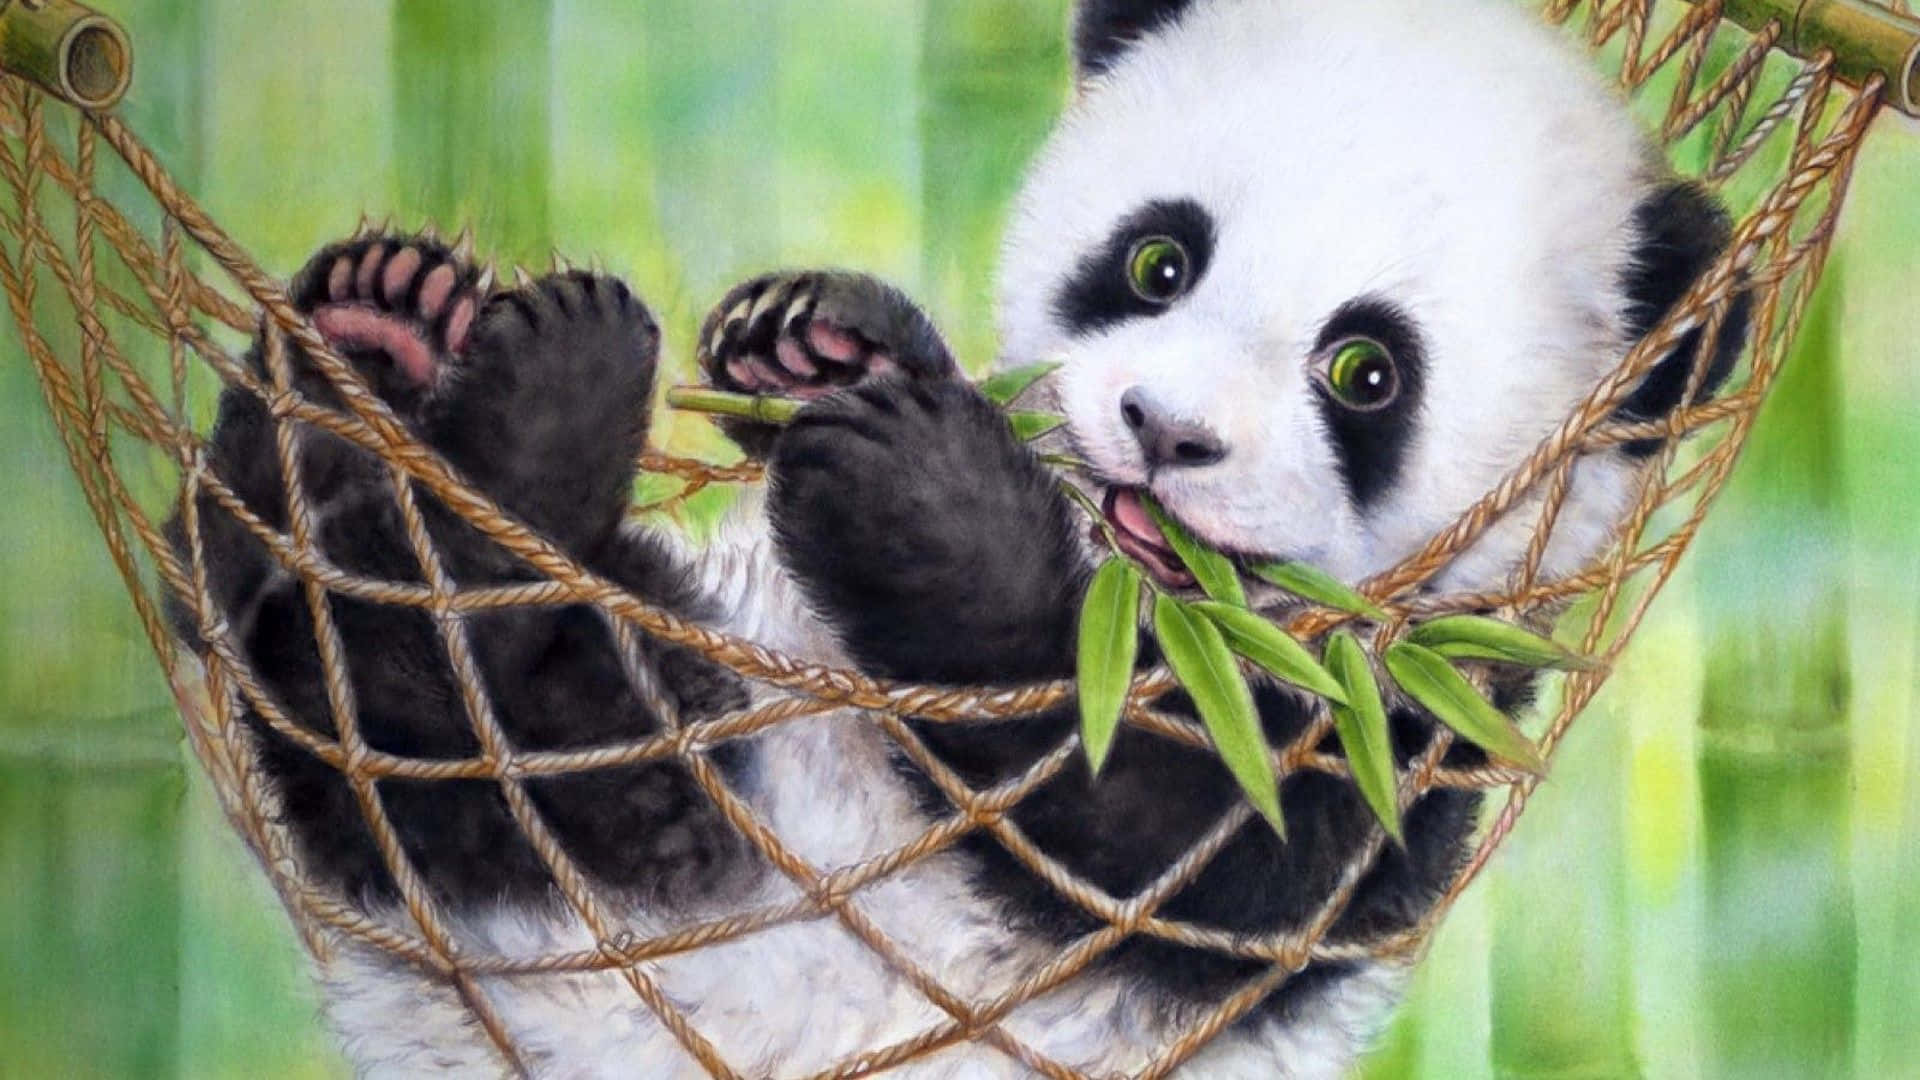 This panda is ready to PLAY!